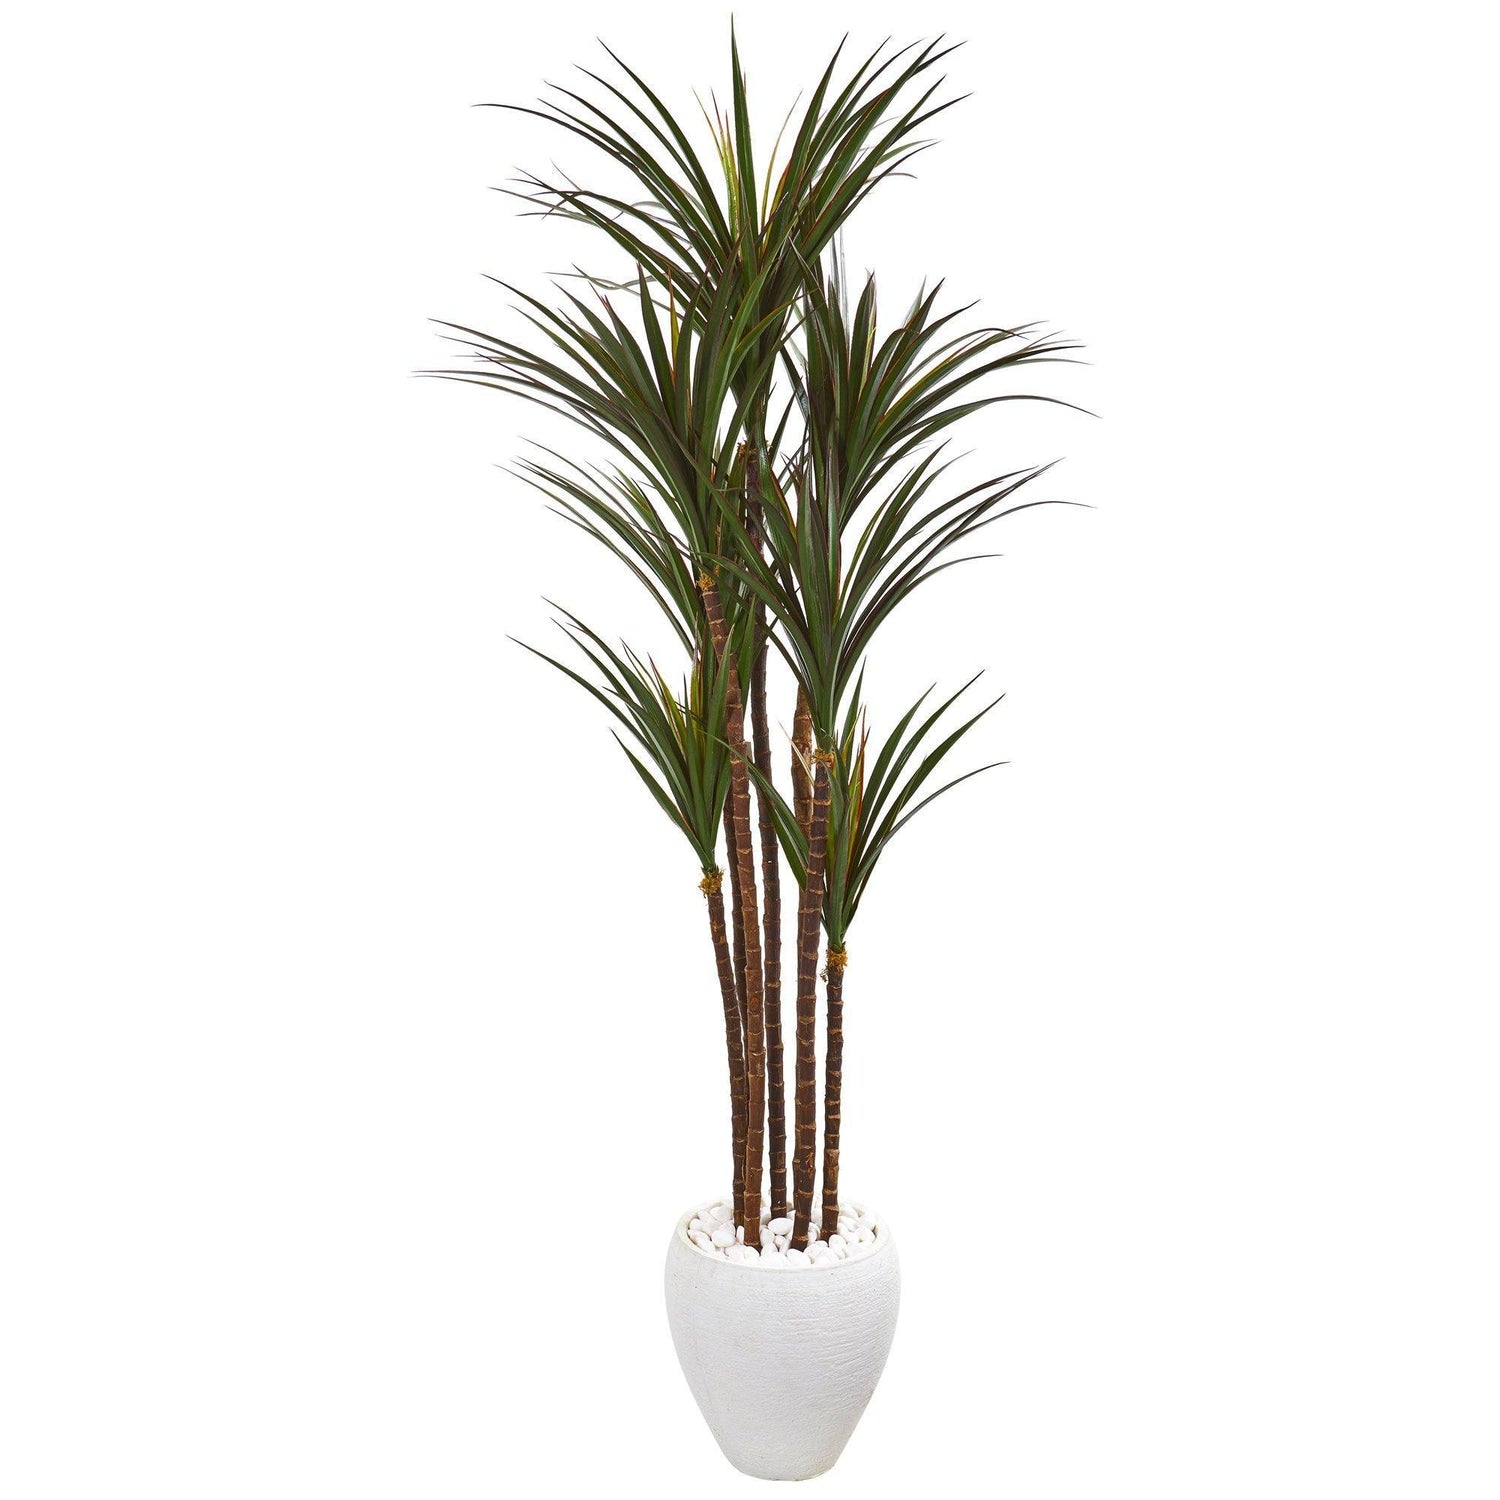 70” Giant Yucca Artificial Tree in White Planter Indoor/Outdoor